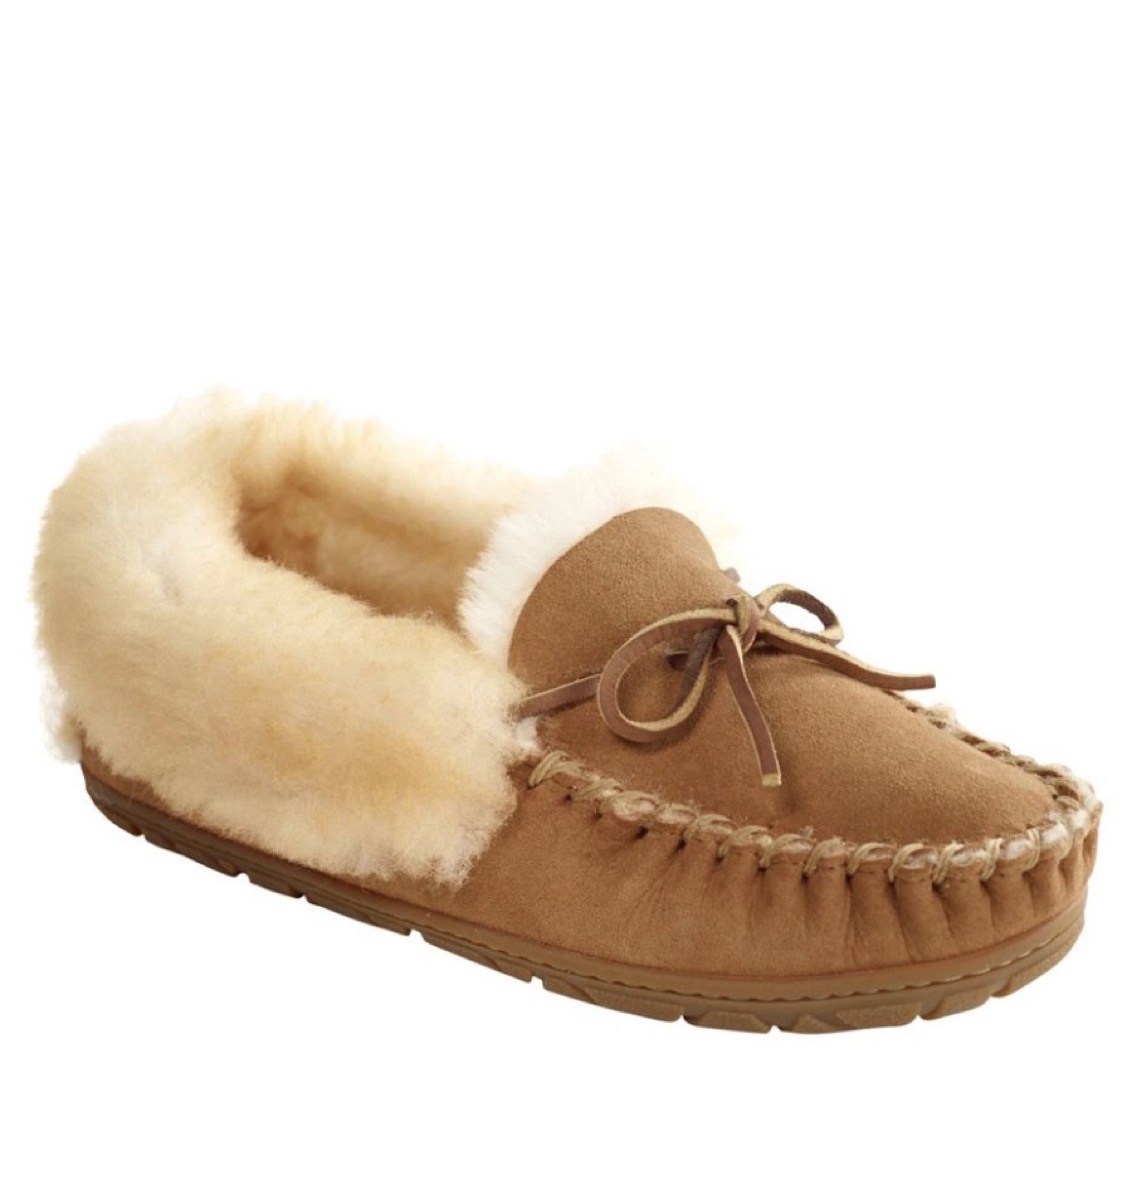 shearling slippers, best gifts for college students